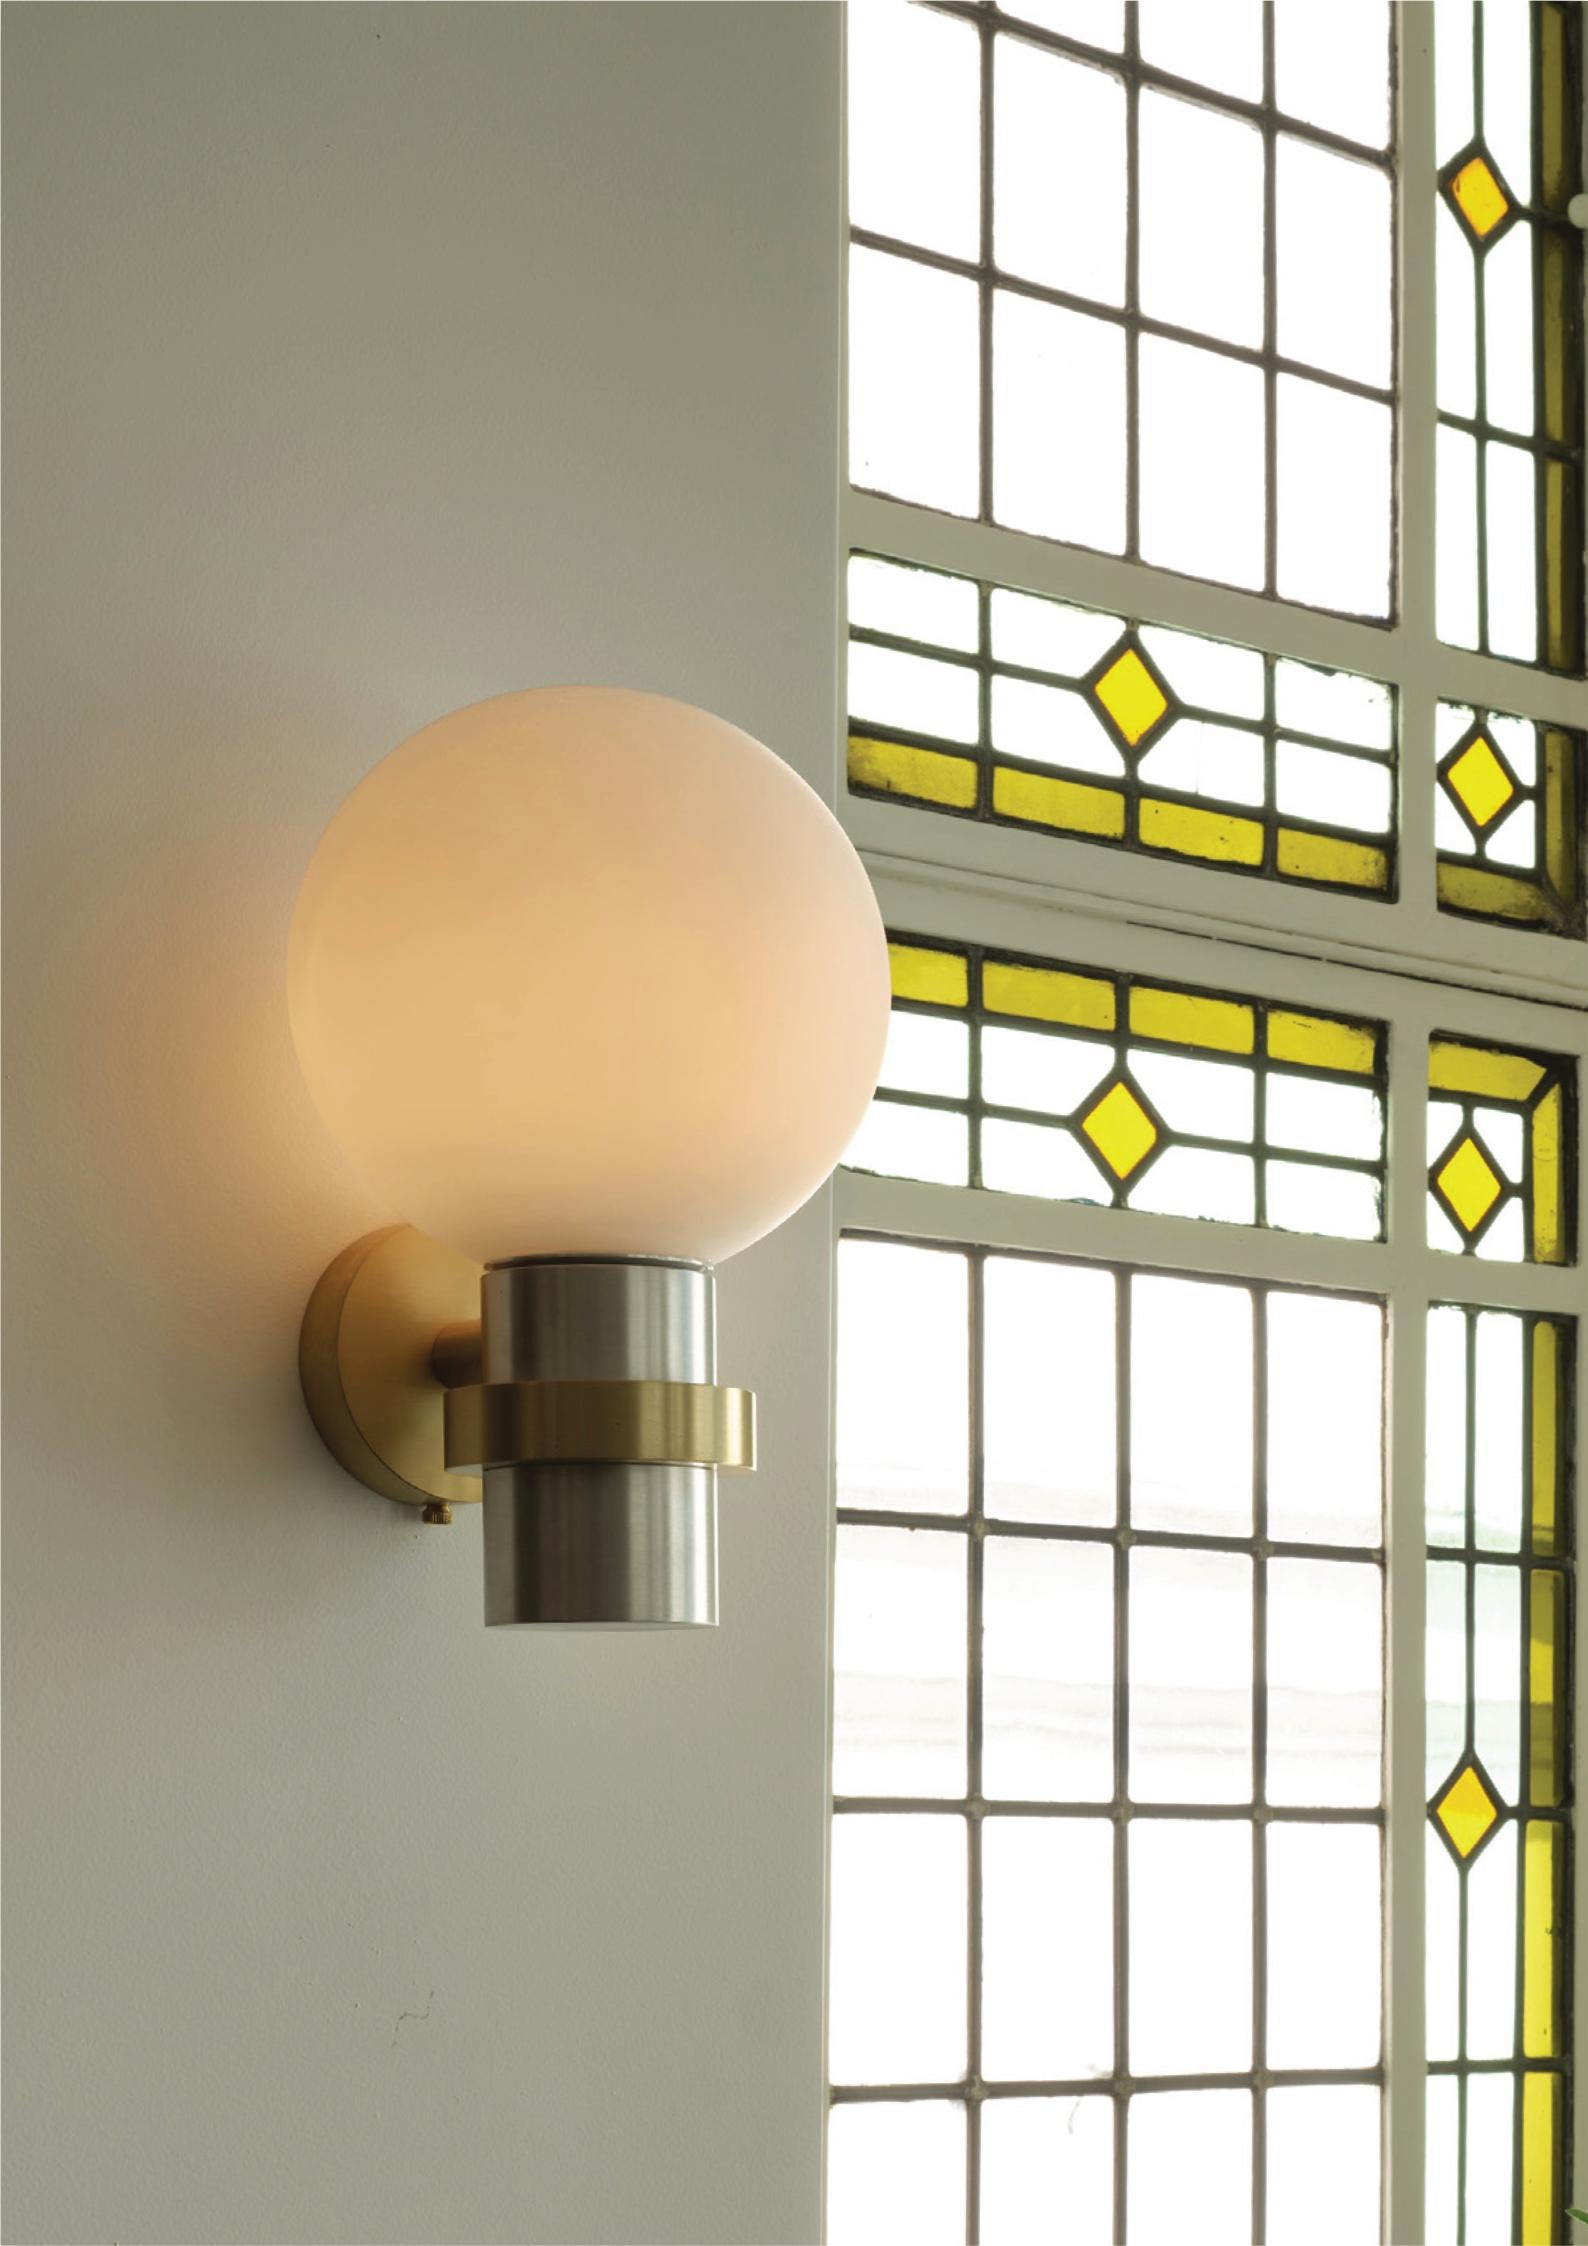 French 21th C Contemporary Marine Breynaert Wall Sconce Lamp Brushed Brass Glass Black For Sale